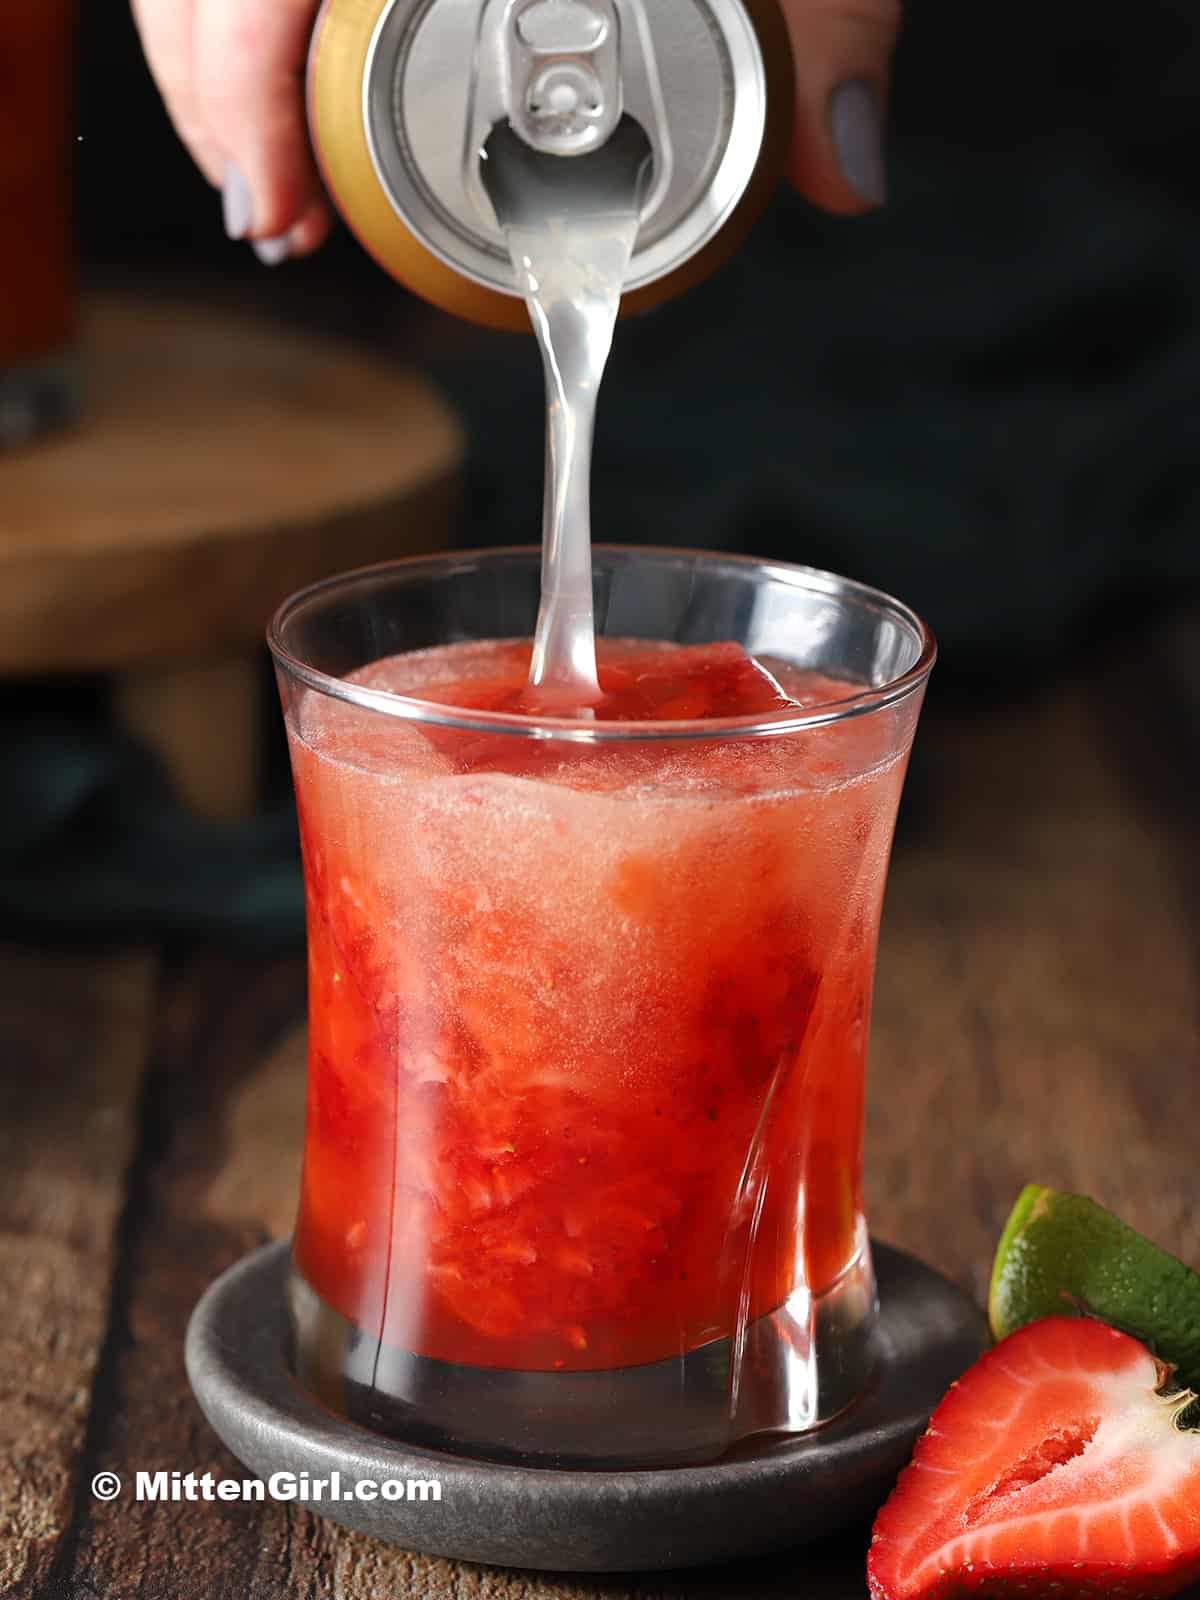 Ginger beer being poured into a rocks glass filled with strawberry cocktail.